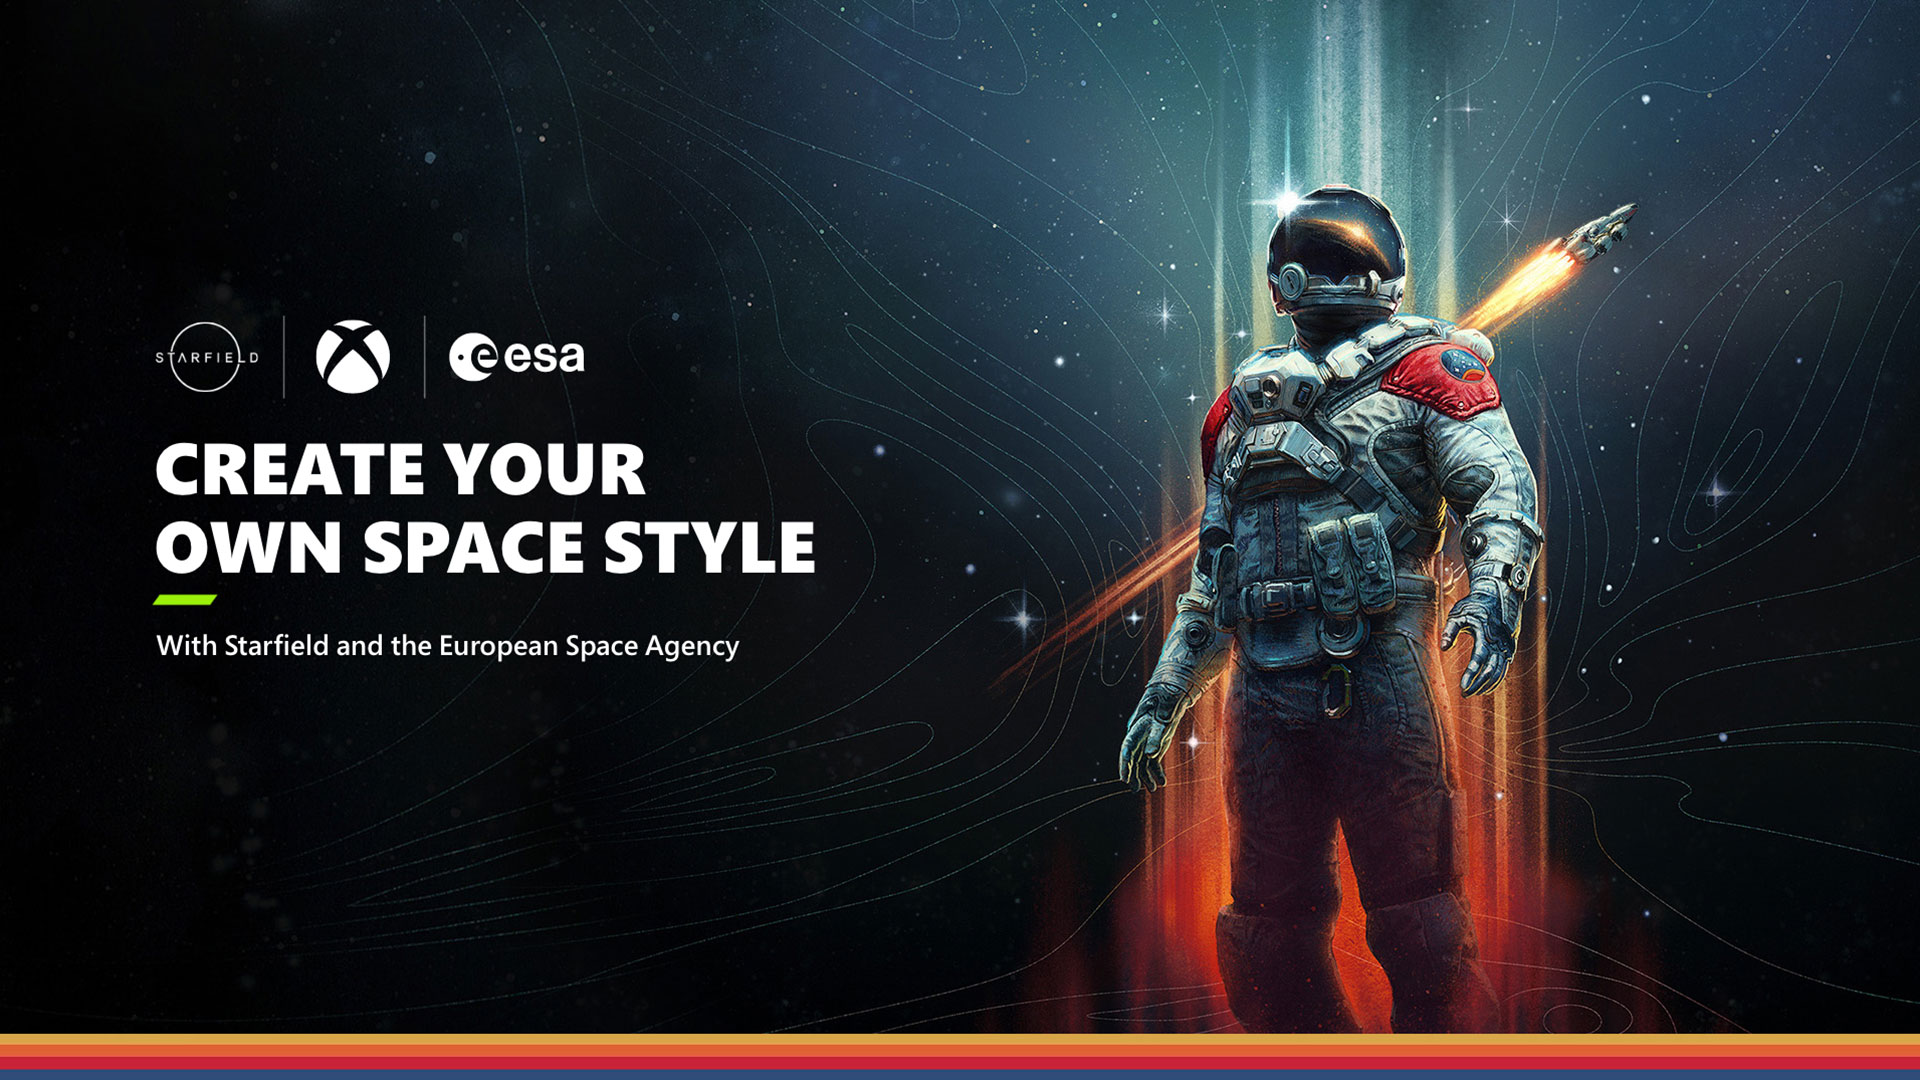 Starfield Spacesuit Competition Hero Image